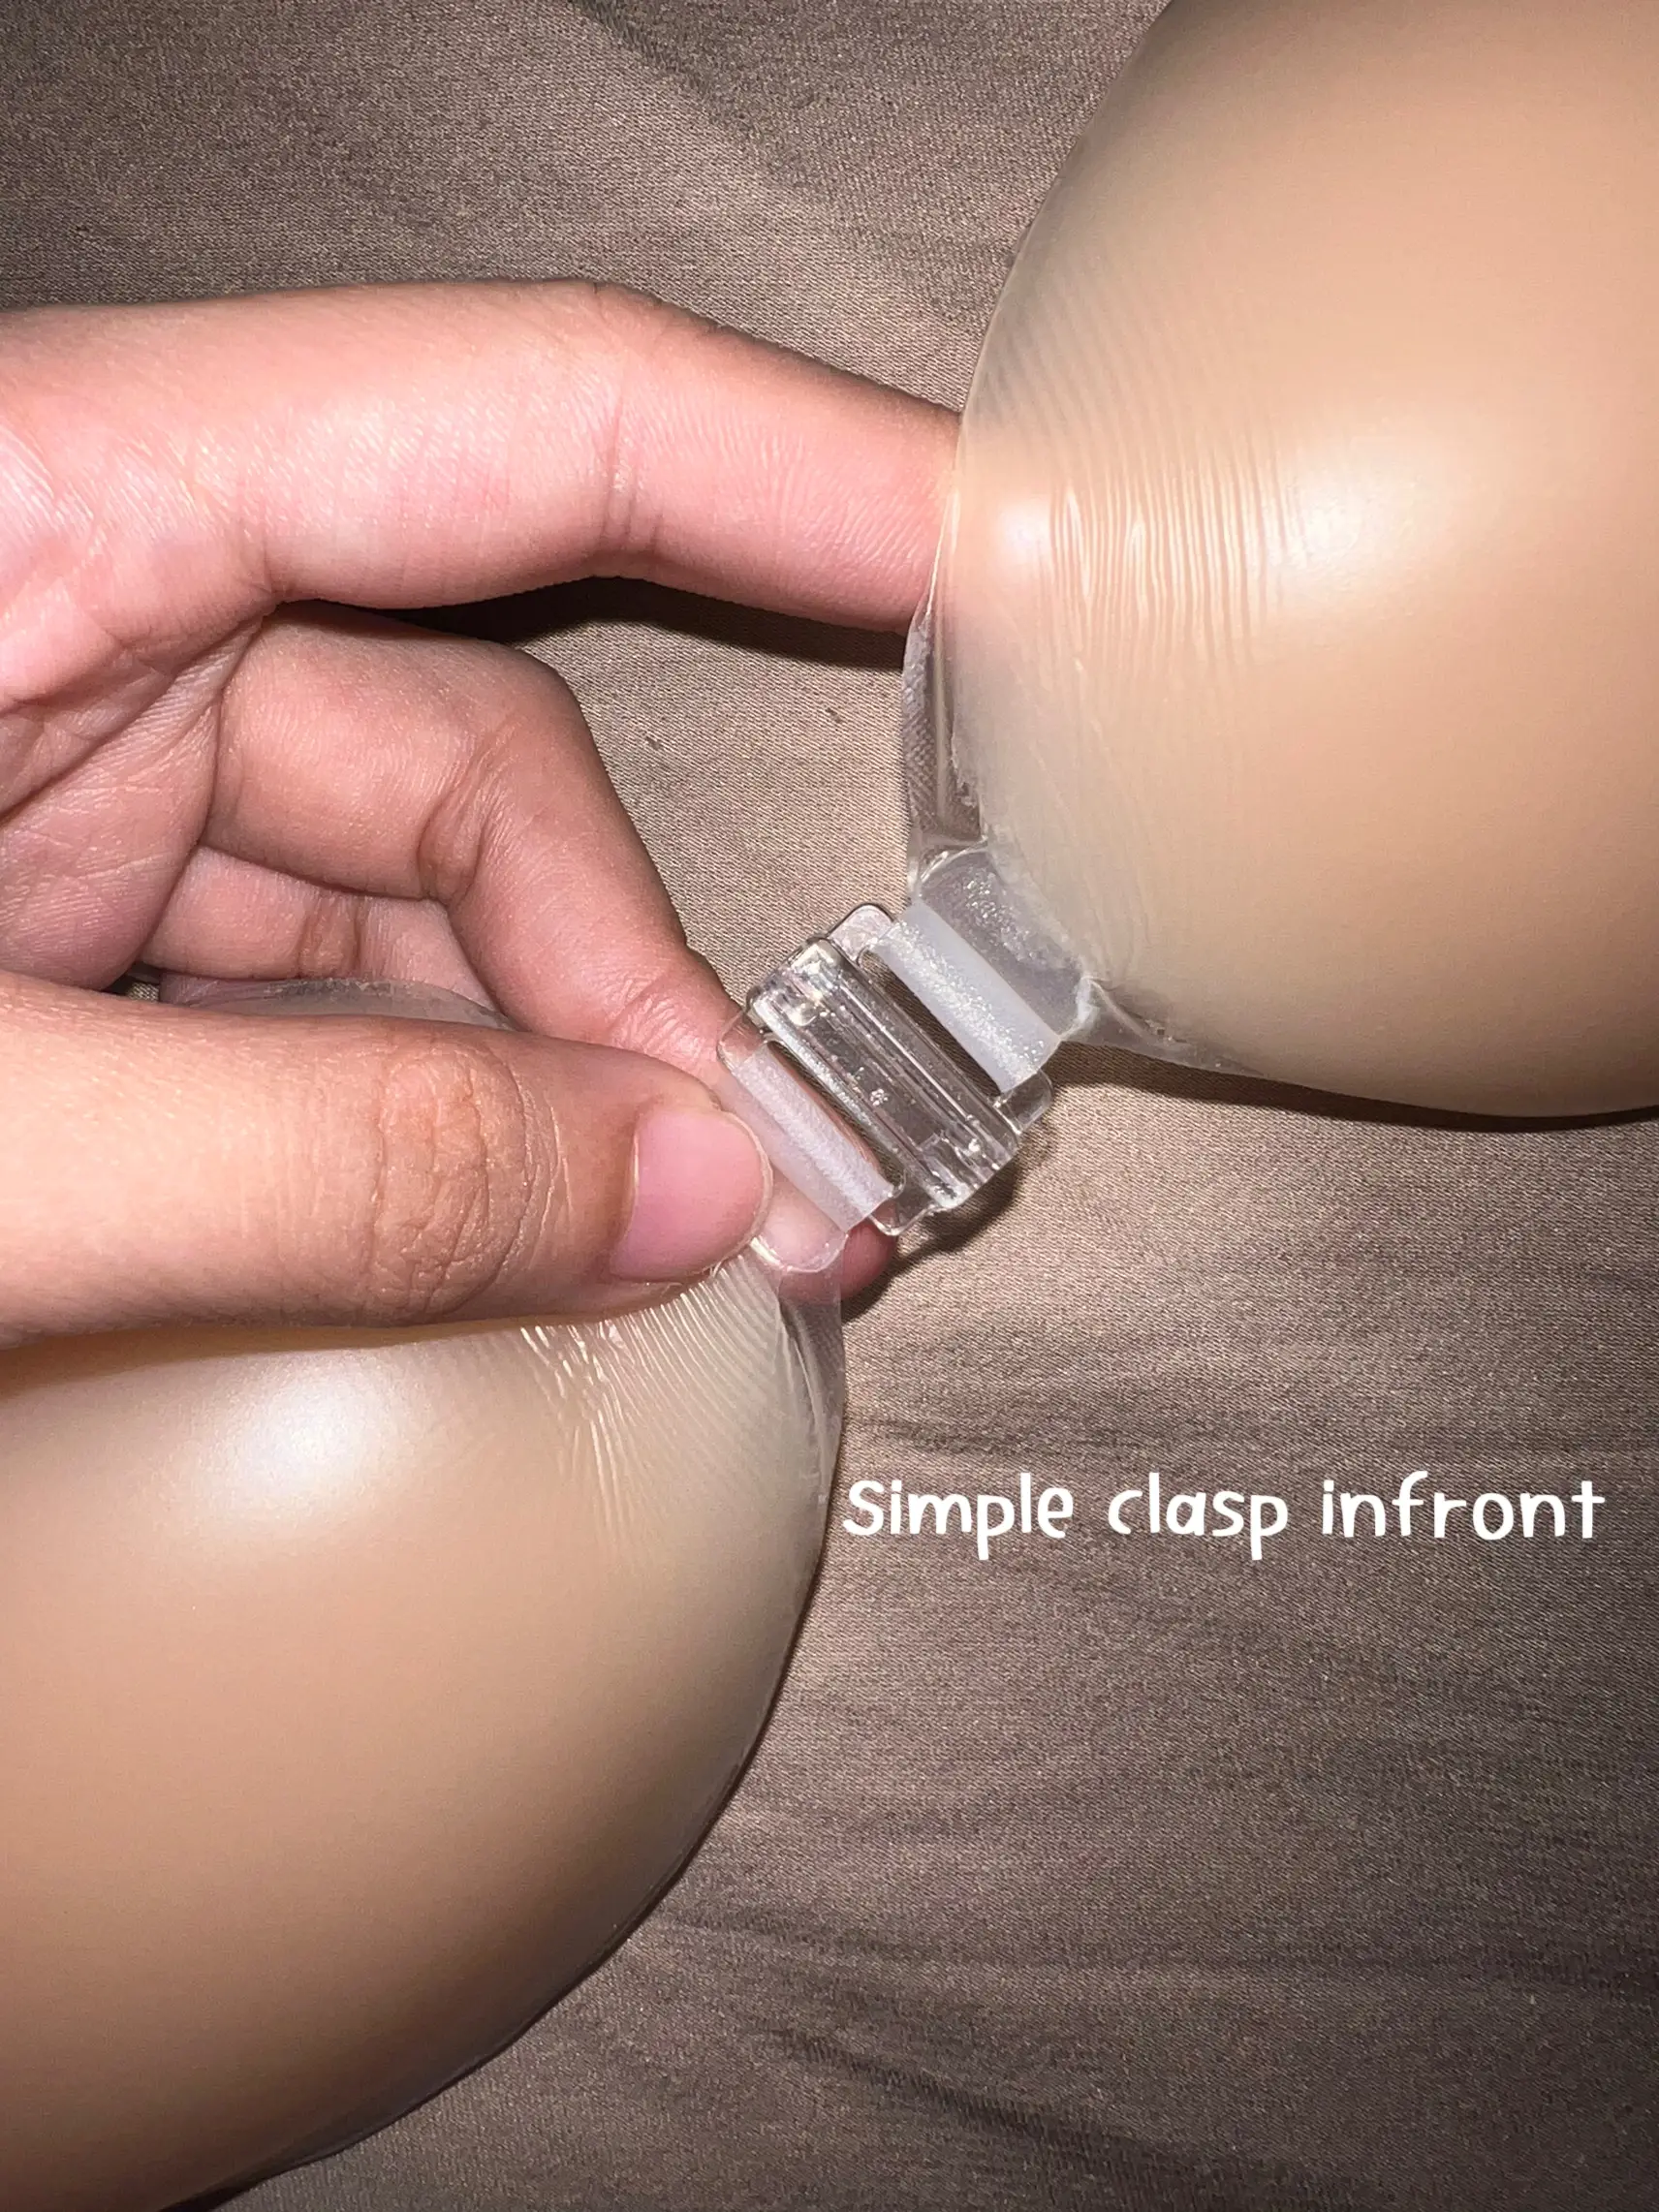 best nipple covers for $3!, Gallery posted by haley ⋆˚｡⋆ ୨୧